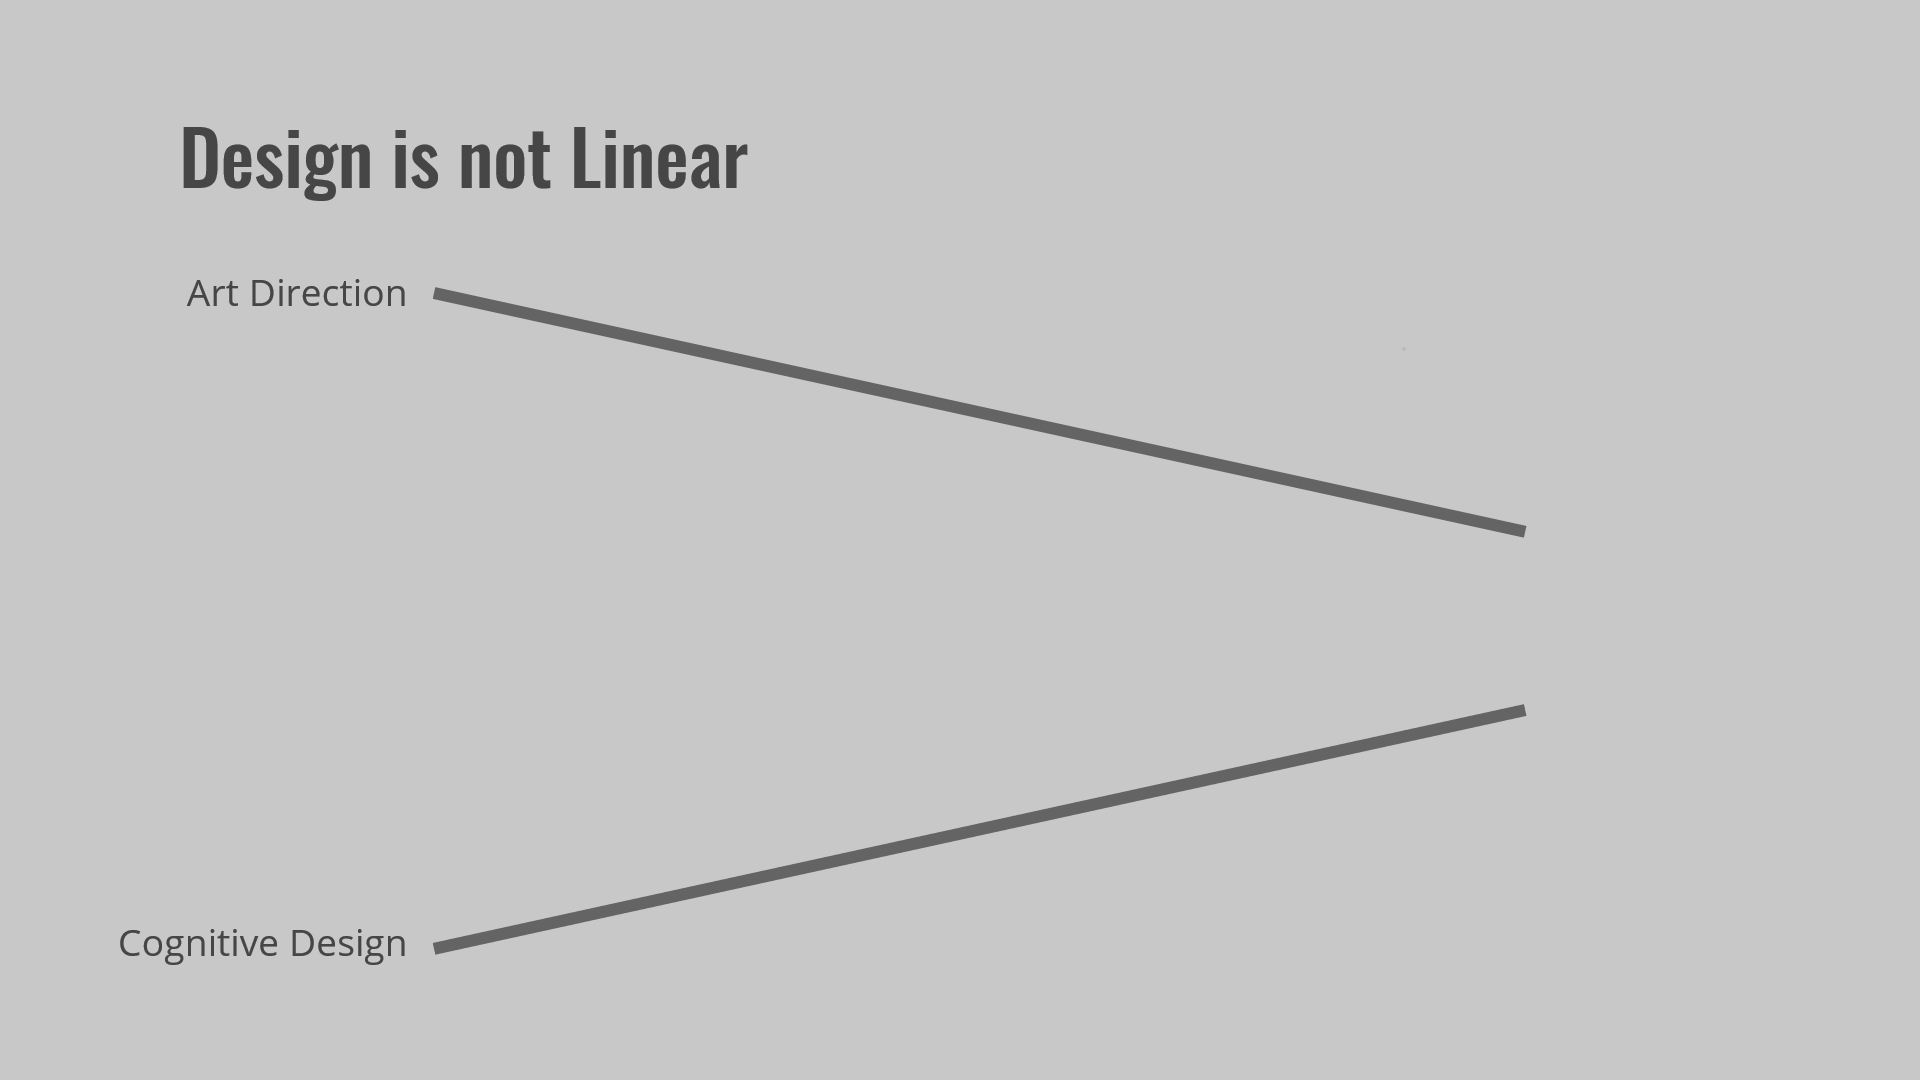 Design is not Linear